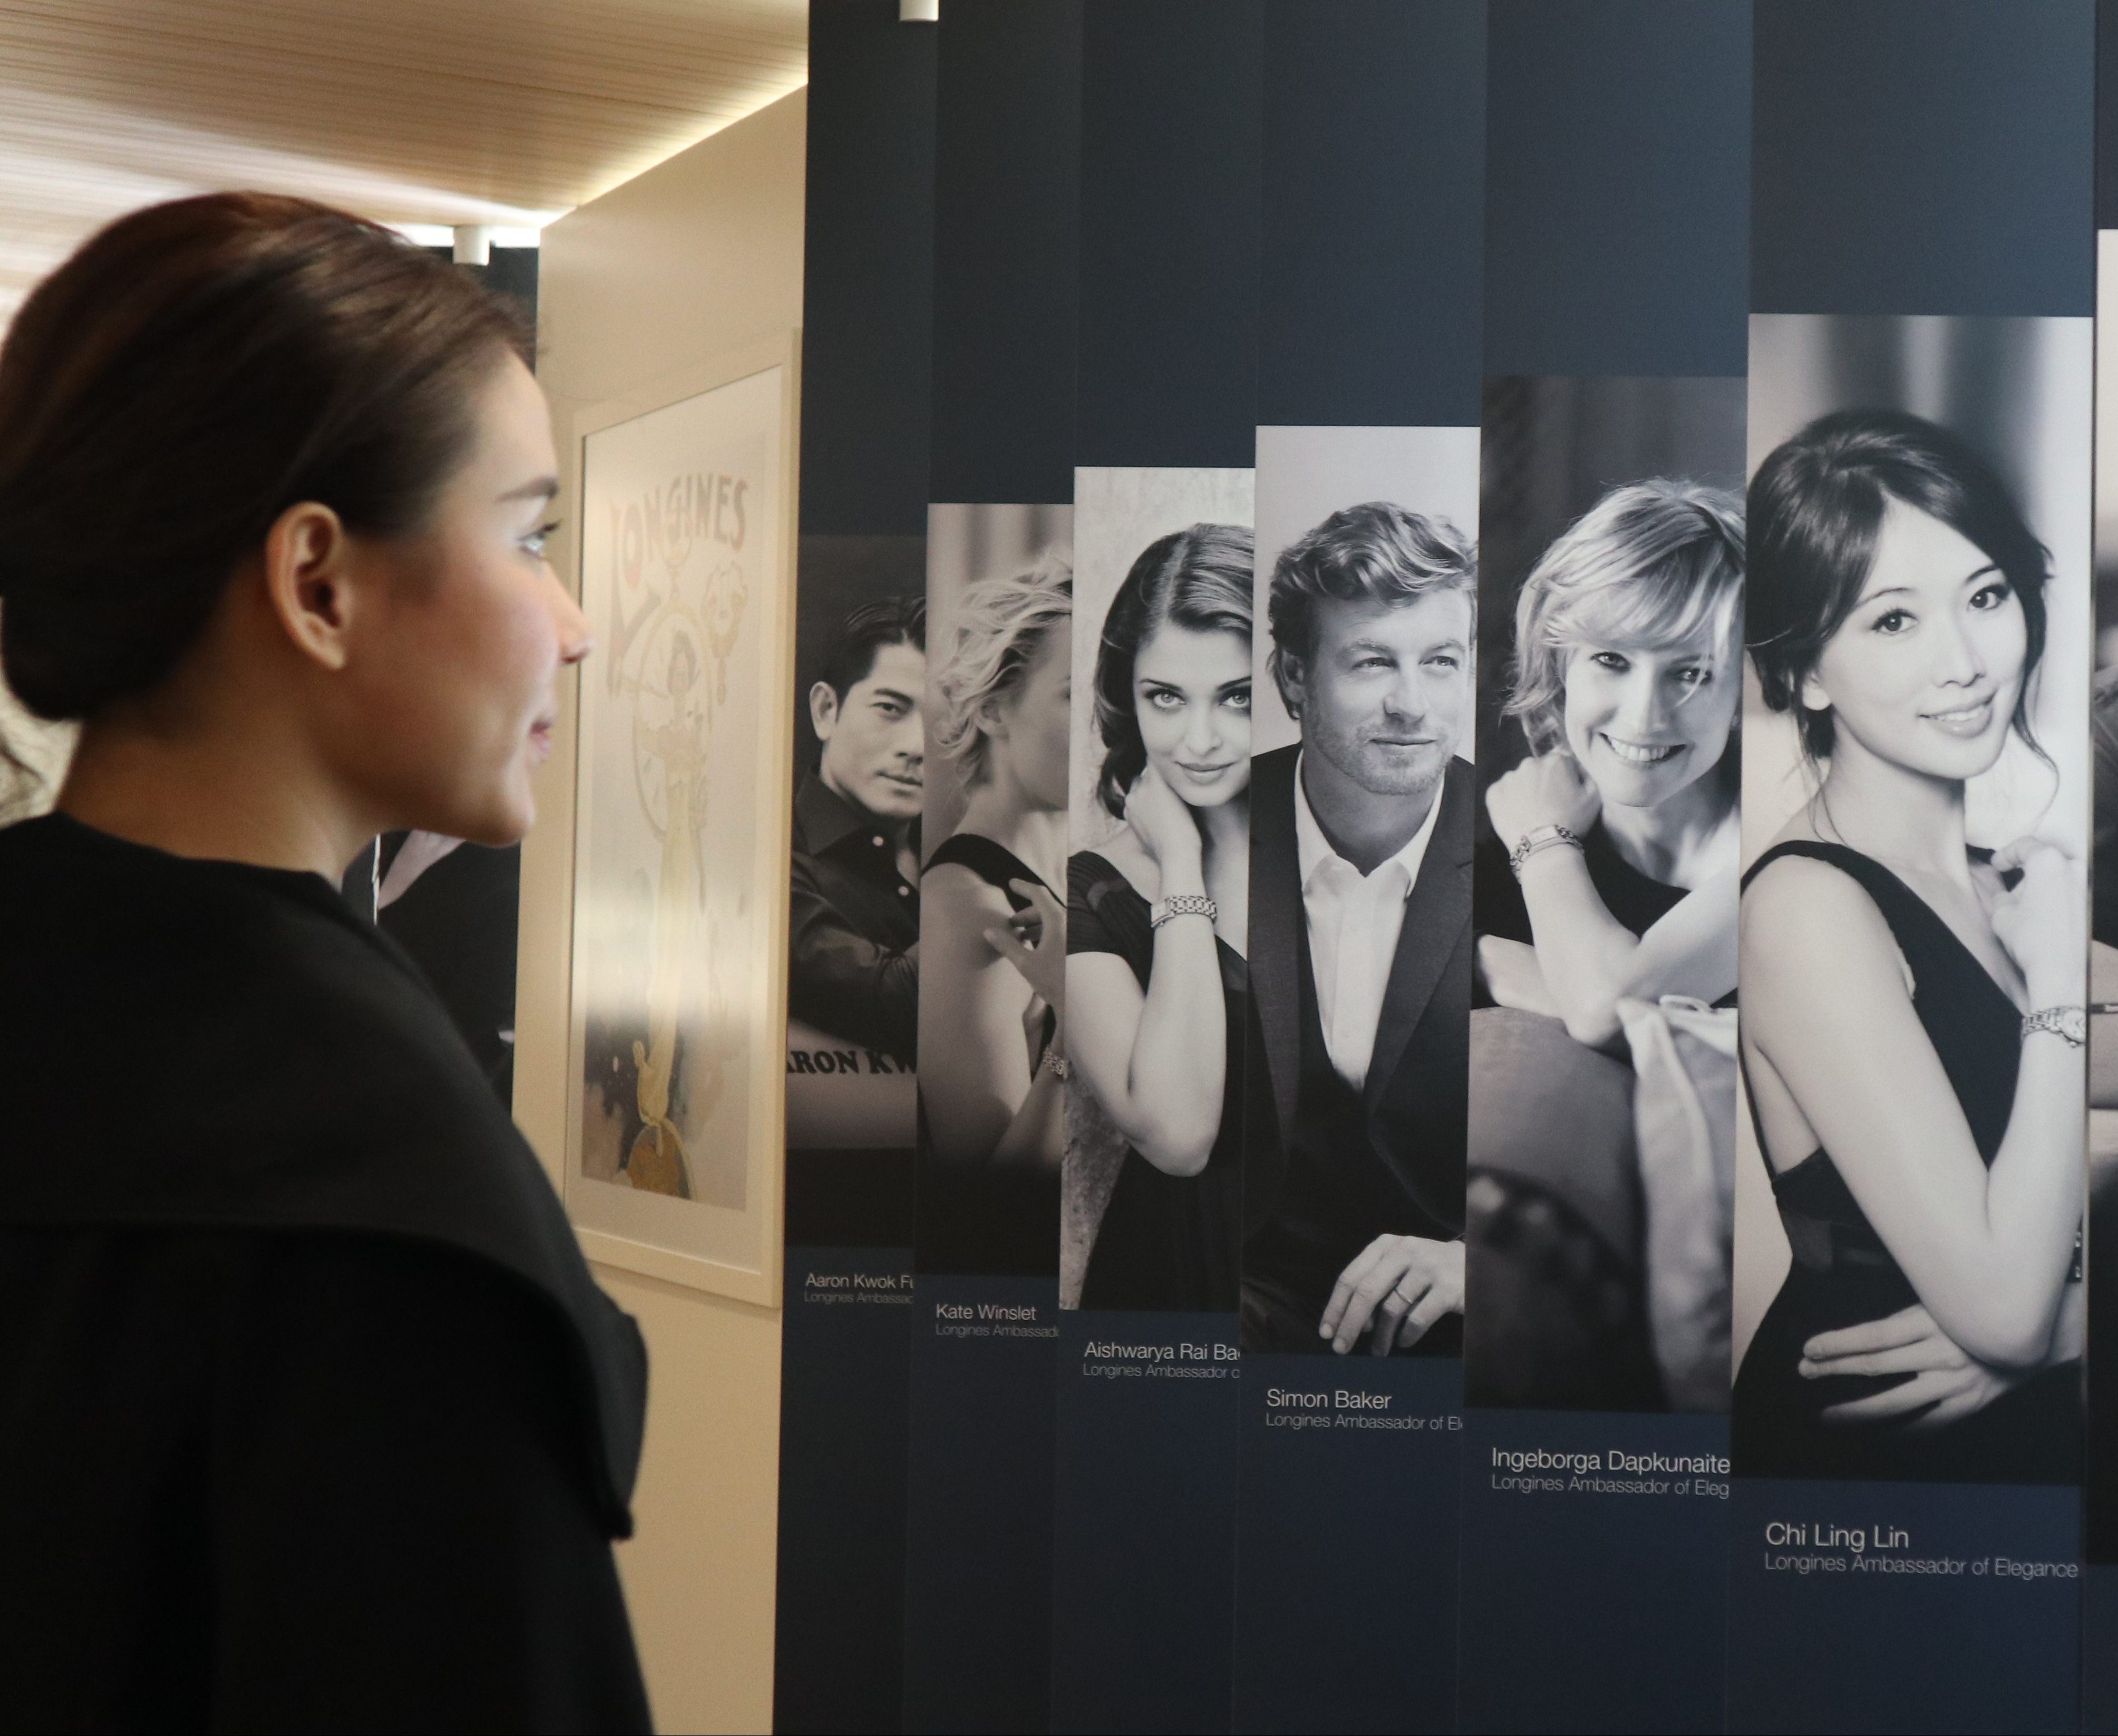 There's a room where you can view past and present Longines ads